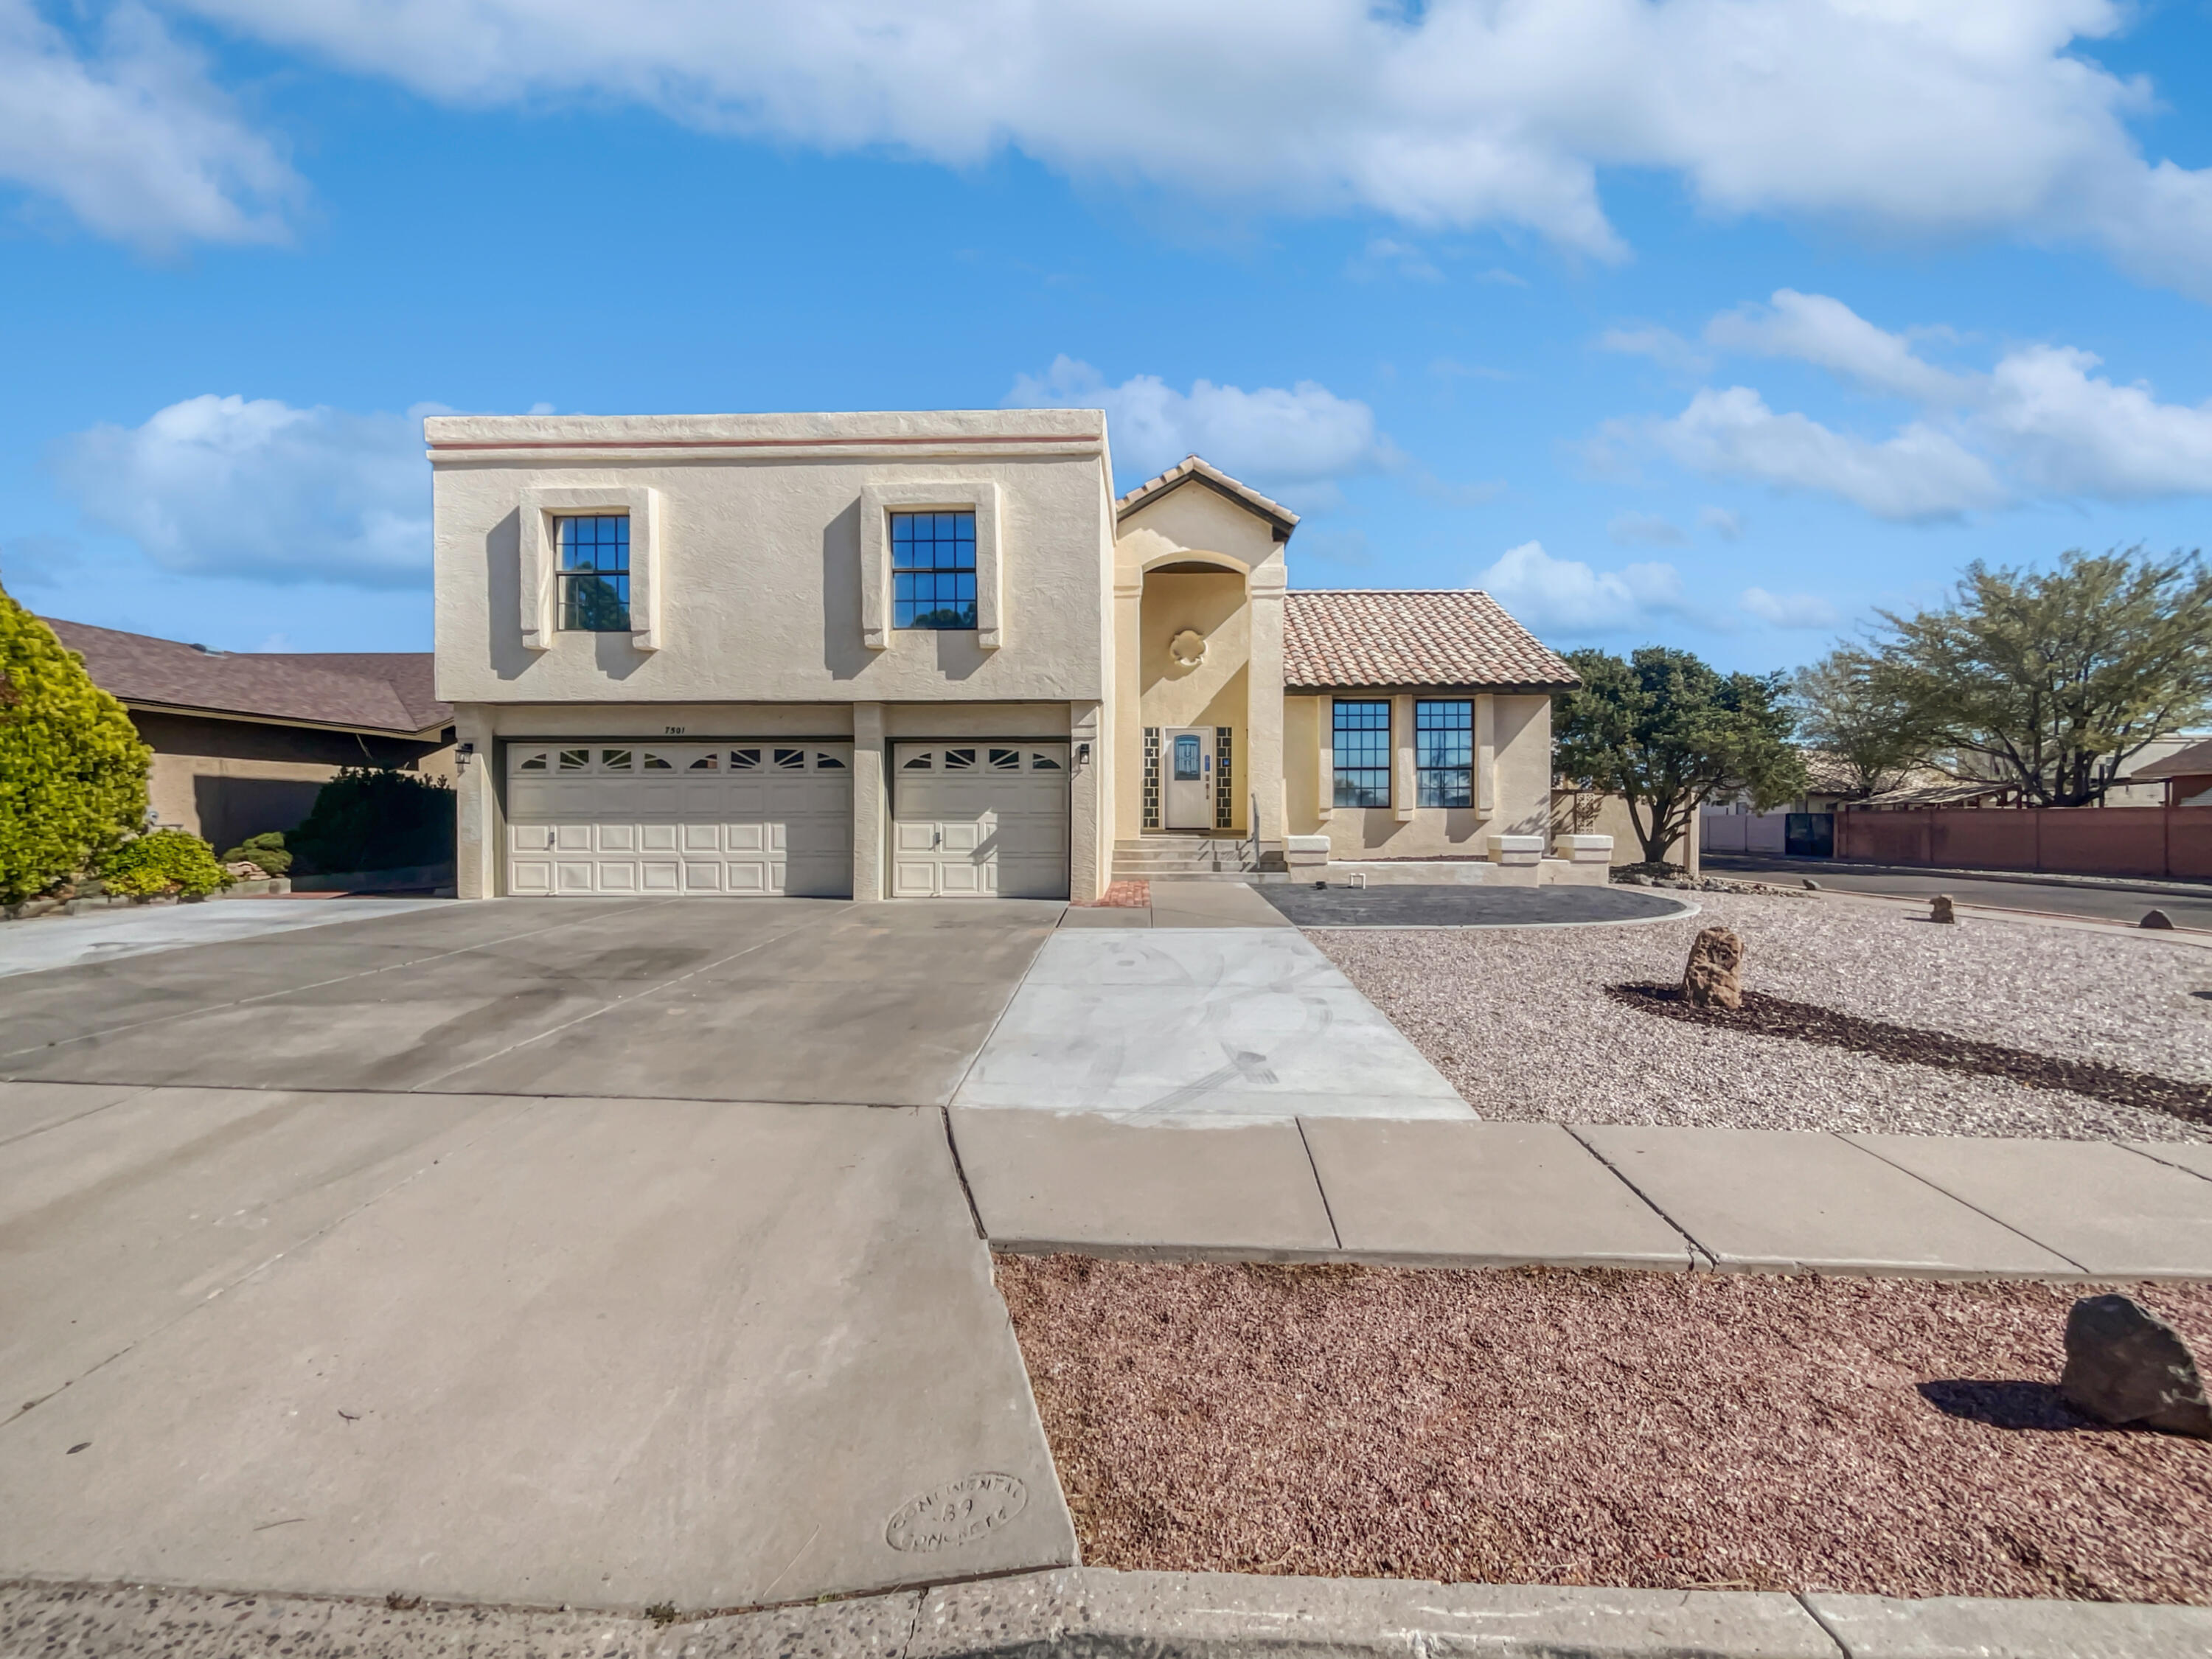 7501 Sherwood Drive NW, Albuquerque, New Mexico 87120, 4 Bedrooms Bedrooms, ,3 BathroomsBathrooms,Residential,For Sale,7501 Sherwood Drive NW,1060702